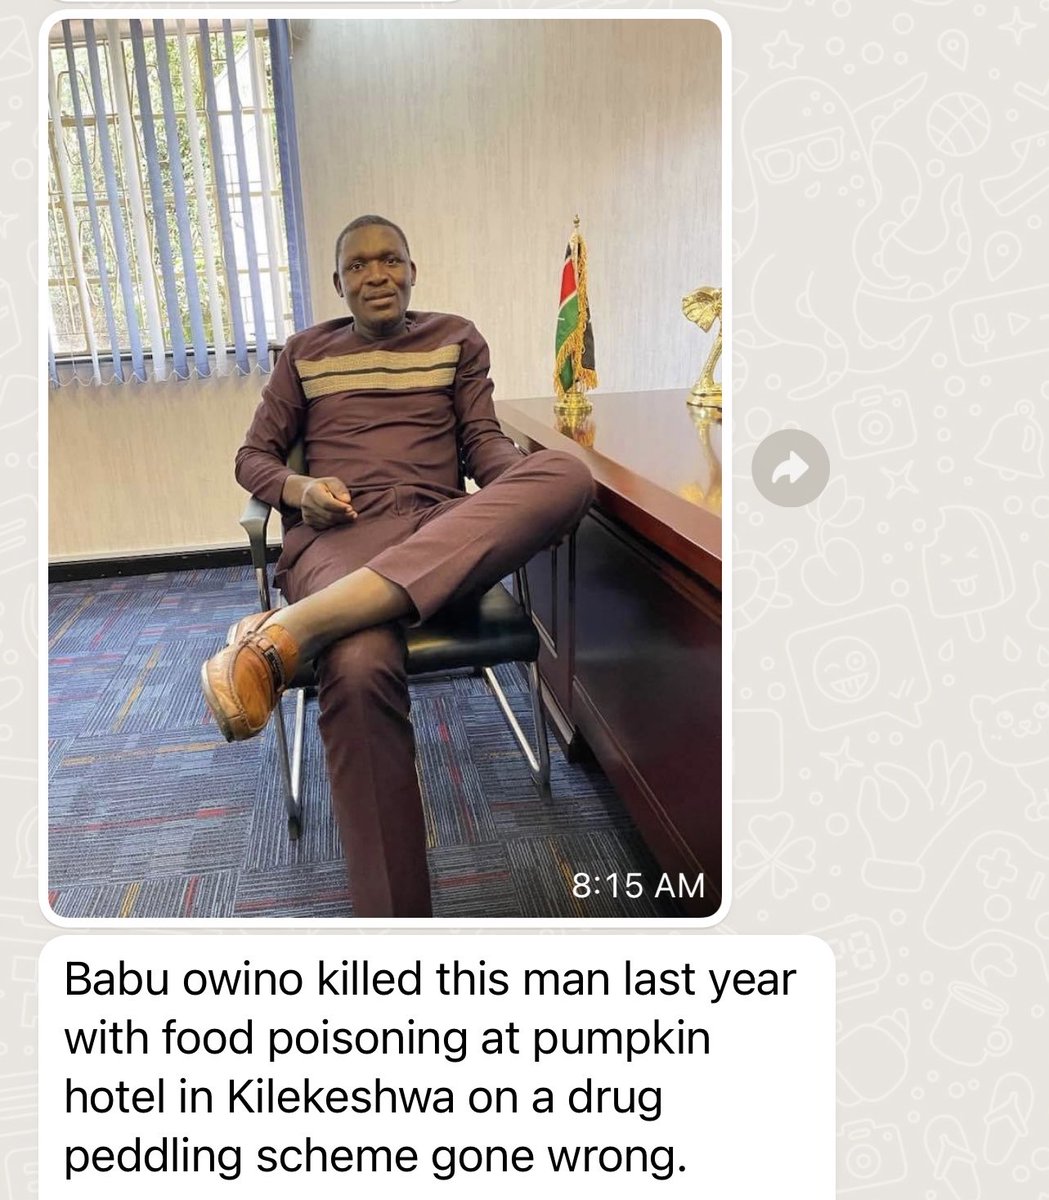 Criminal Babu Owino murdered this young man last year at the Pumpkin Hotel, Nairobi. We can’t continue to turn a blind eye to Babu Owino’s MASS MURDERS - unless we are looking for another Shakahola!